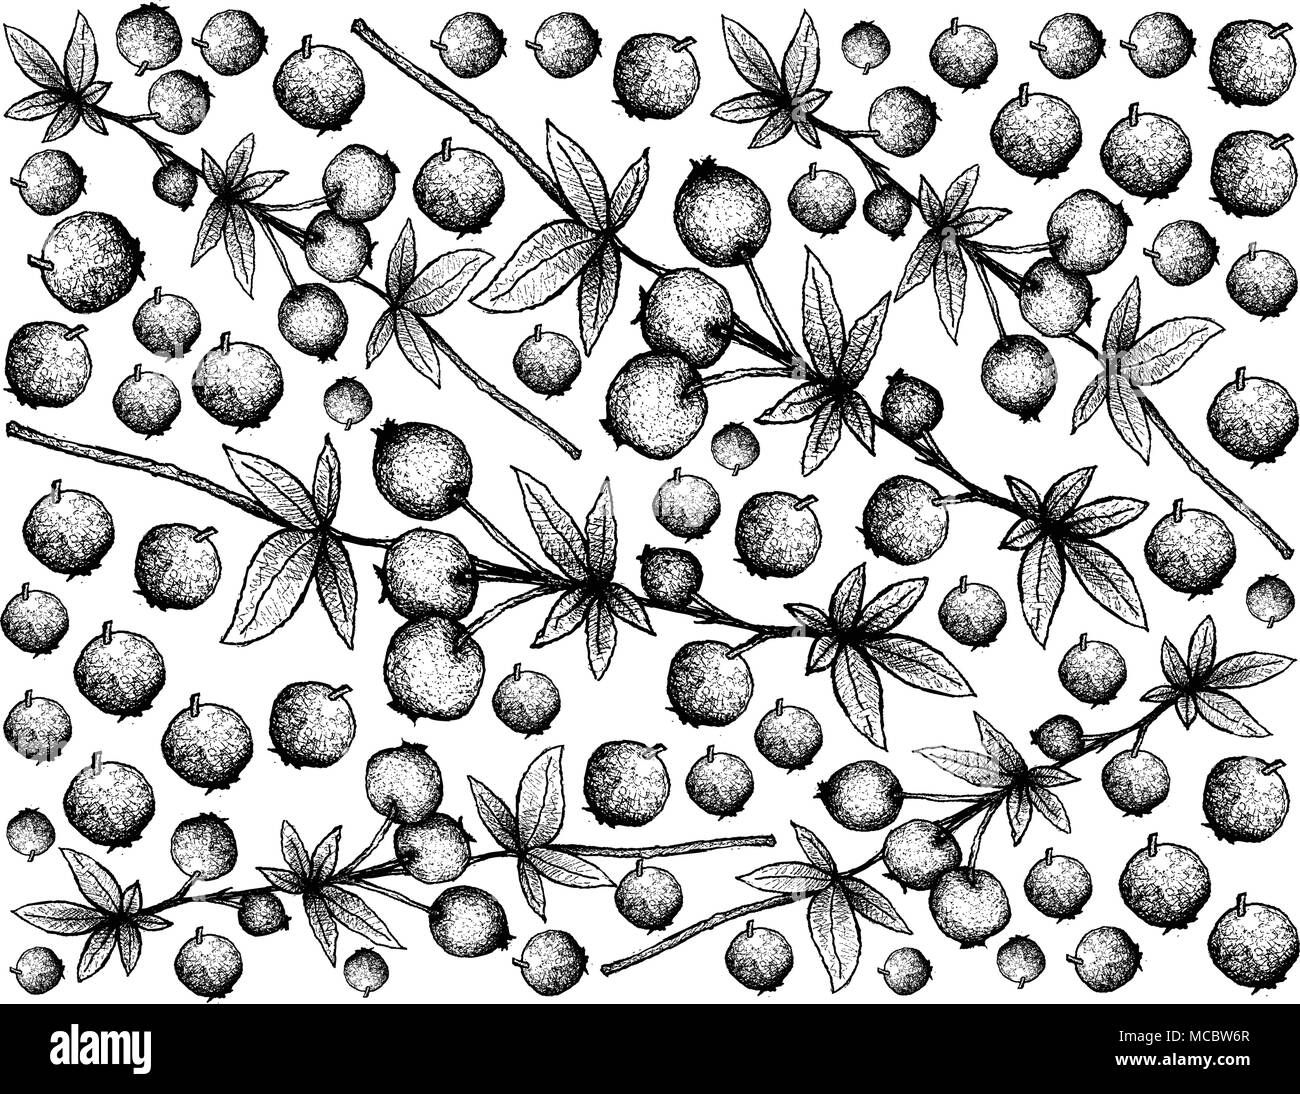 Berry Fruit, Illustration Wallpaper Background of Hand Drawn Sketch of Fresh Calafate Berry or Berberis Microphylla Fruits. Stock Vector